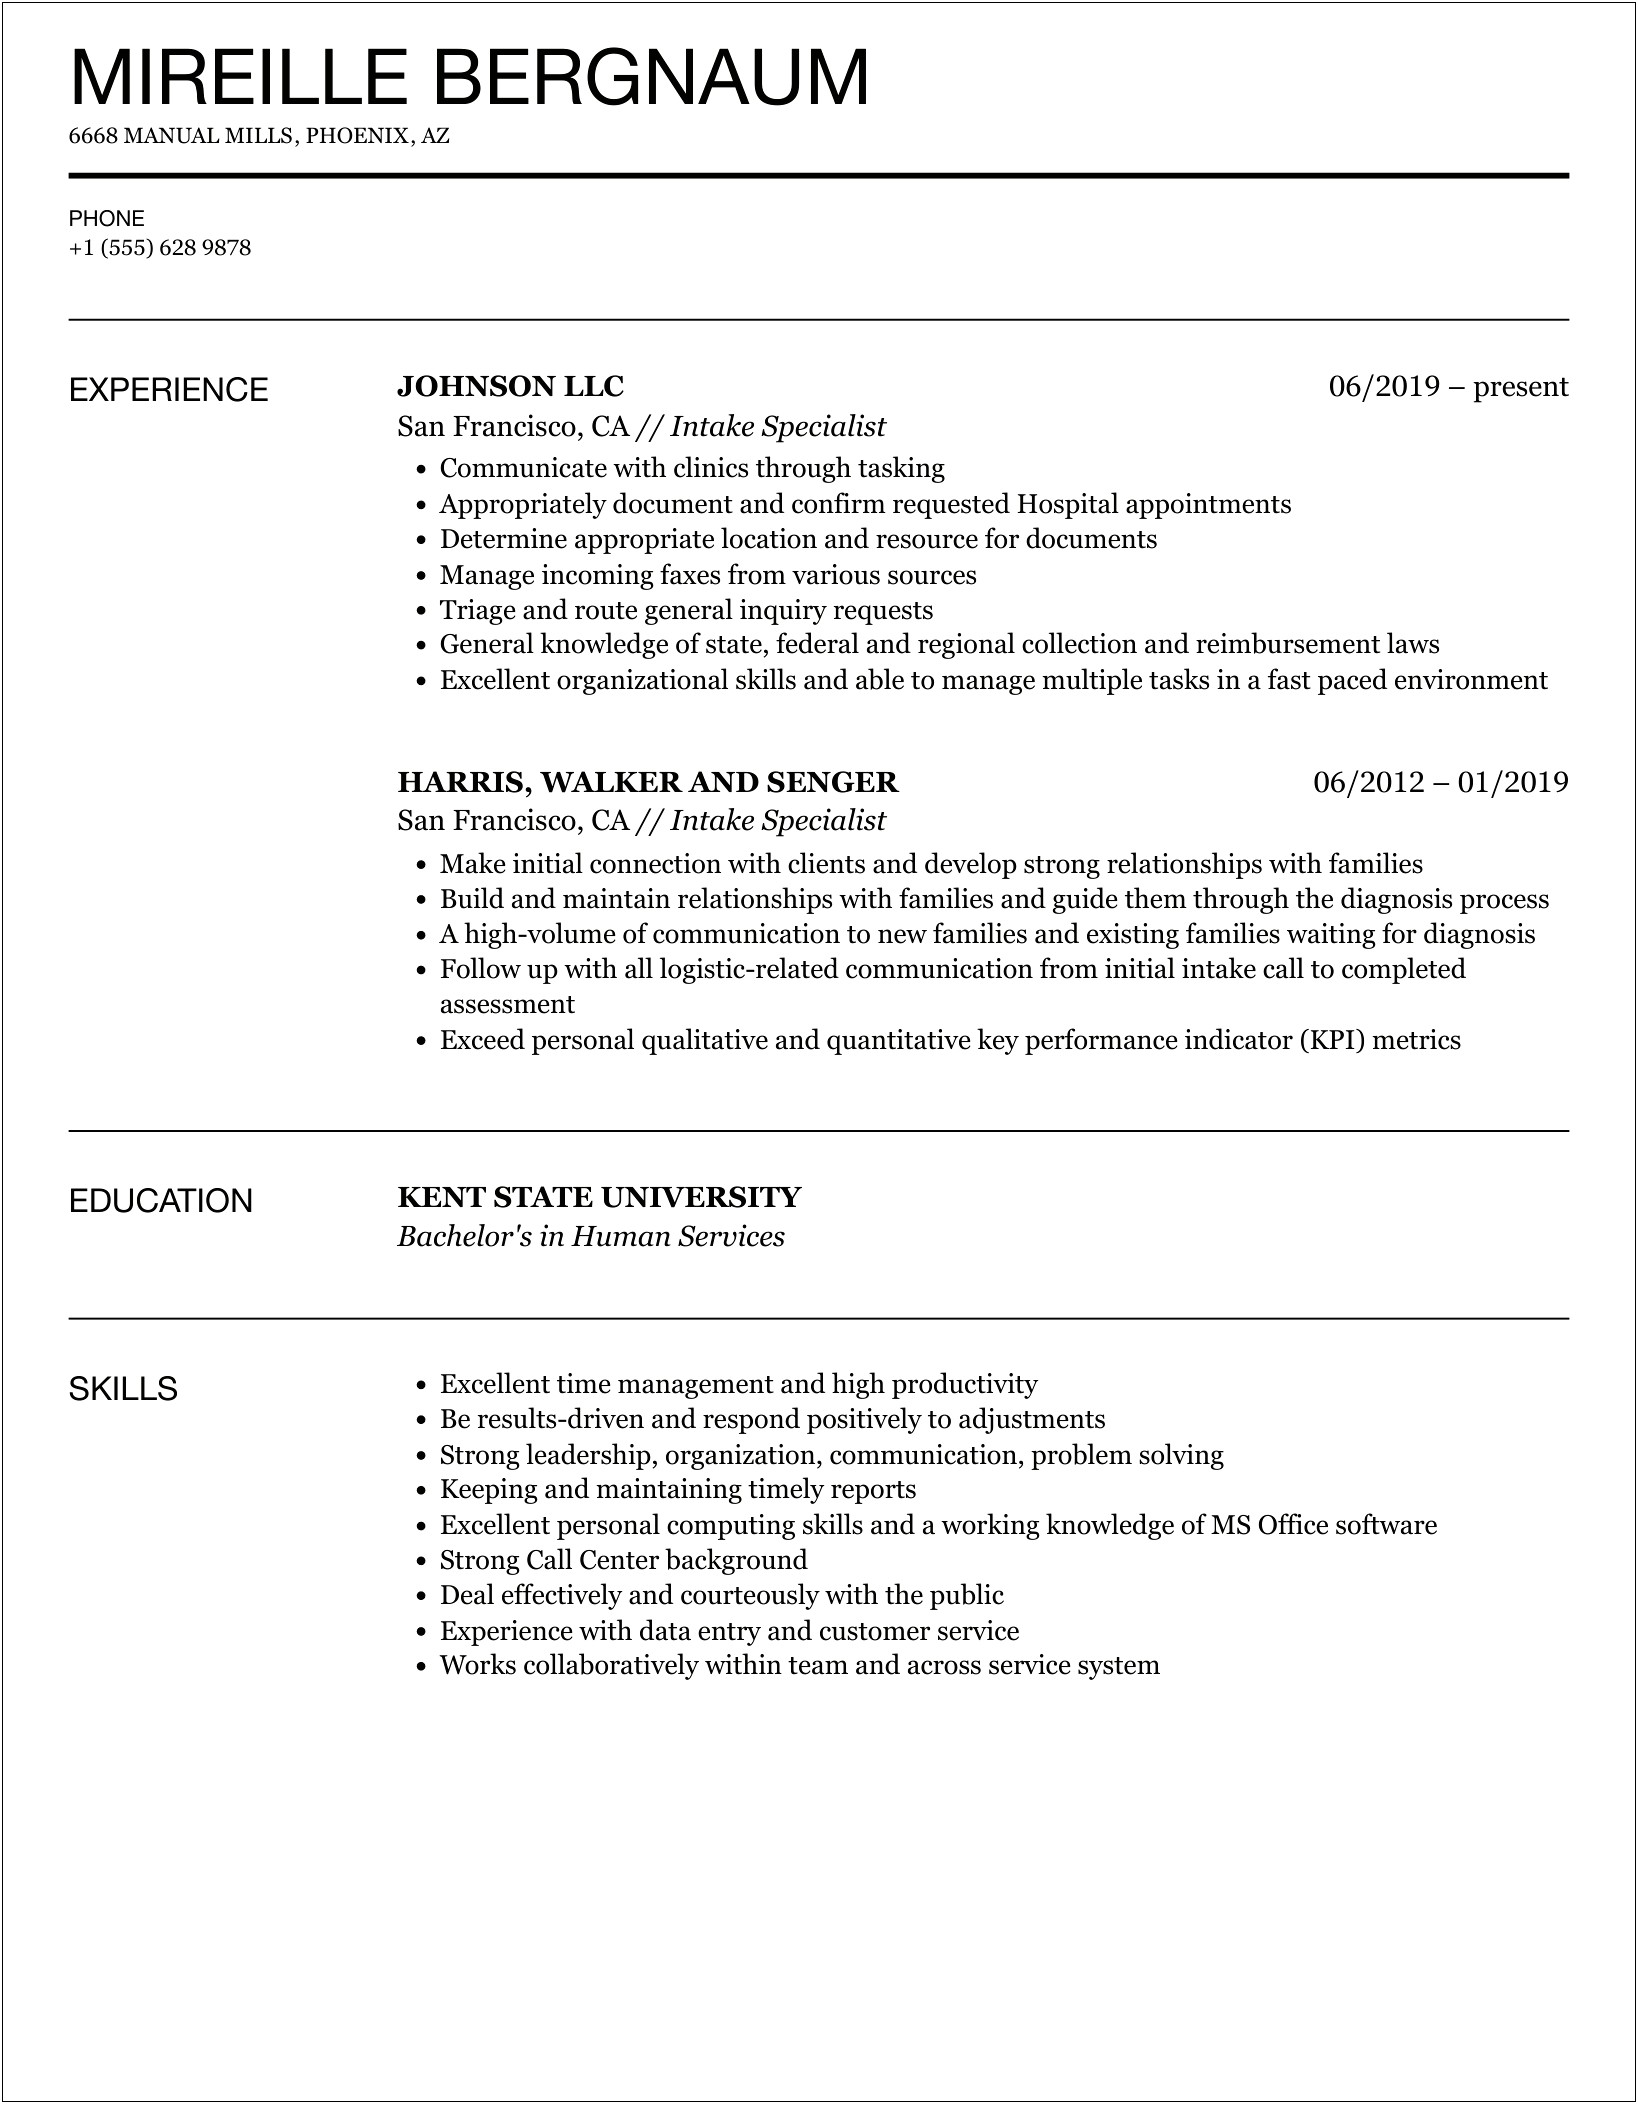 Home Health Intake Specialist Manager Resume Samples